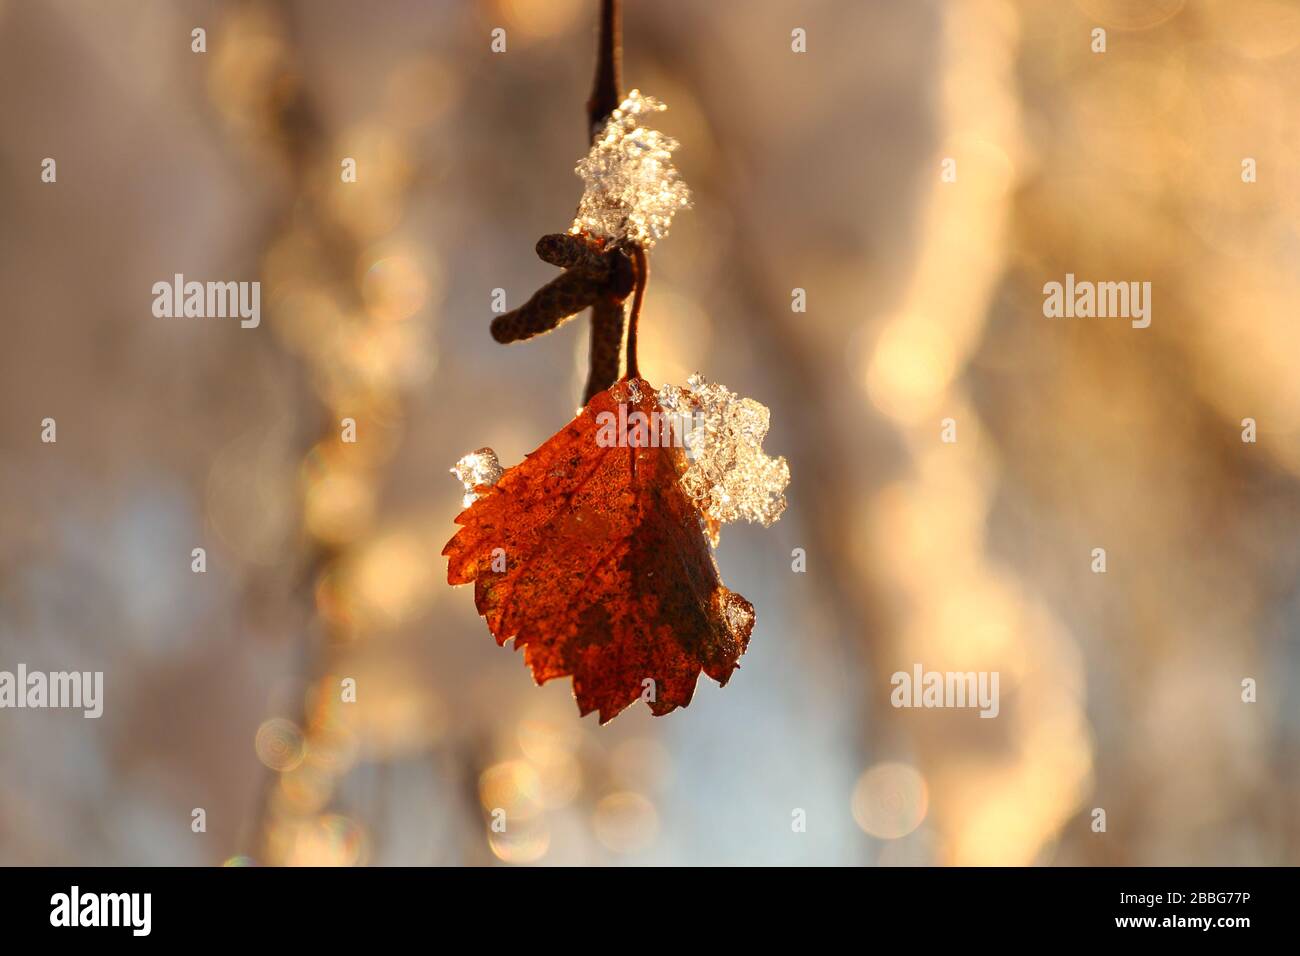 Winter light highlights ice crystals on a Silver birch leaf in central Norway, northern Europe. Stock Photo